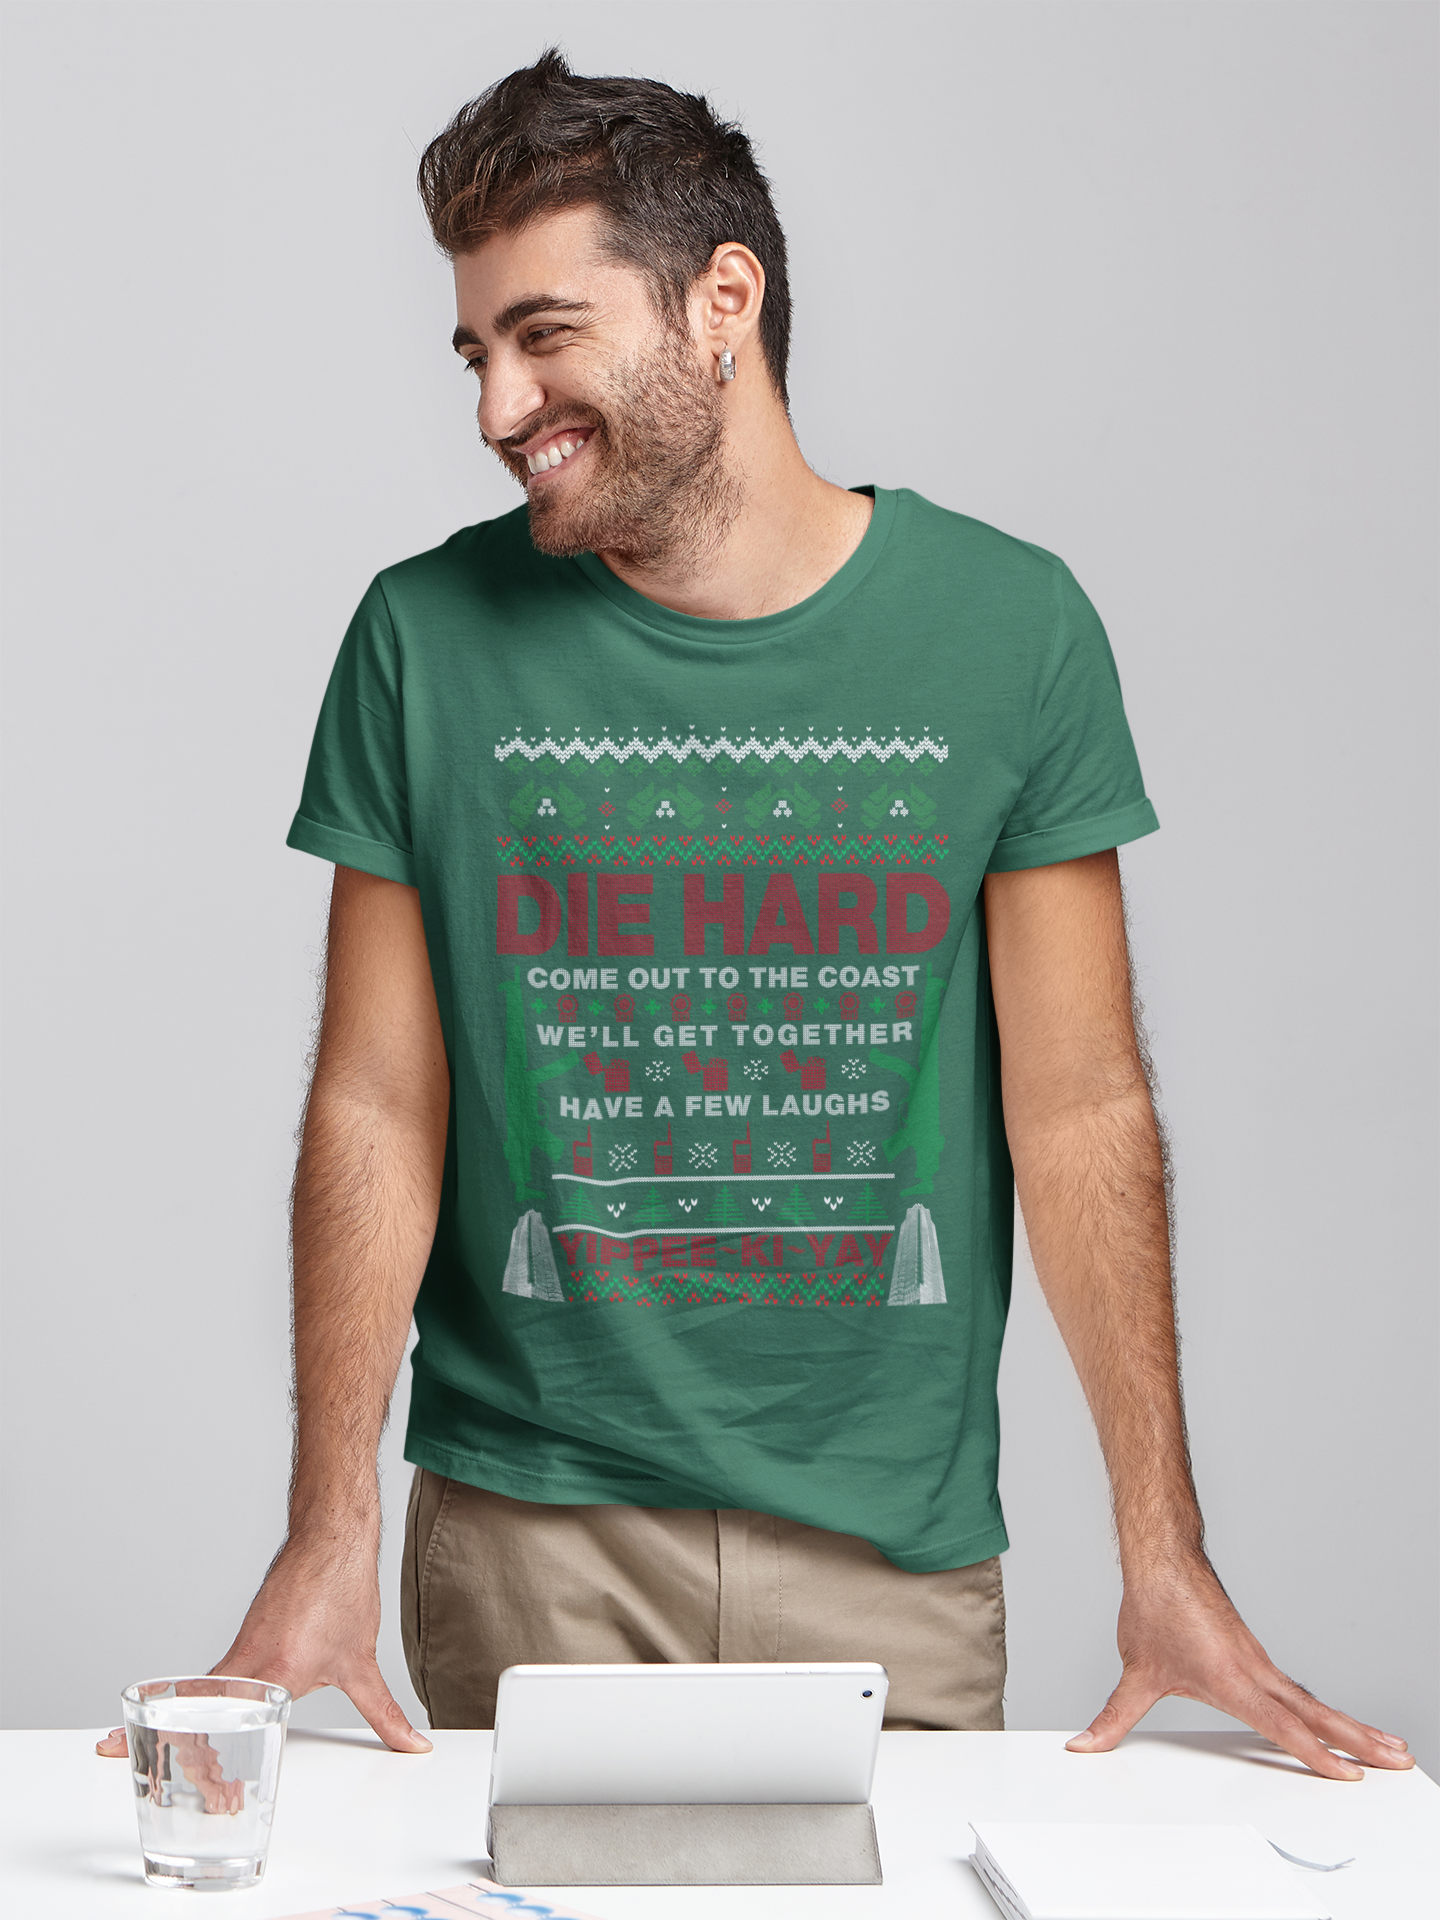 Die Hard Ugly Sweater T Shirt, John McClane Tshirt, Come Out To The Coast Well Get Together T Shirt, Christmas Gifts